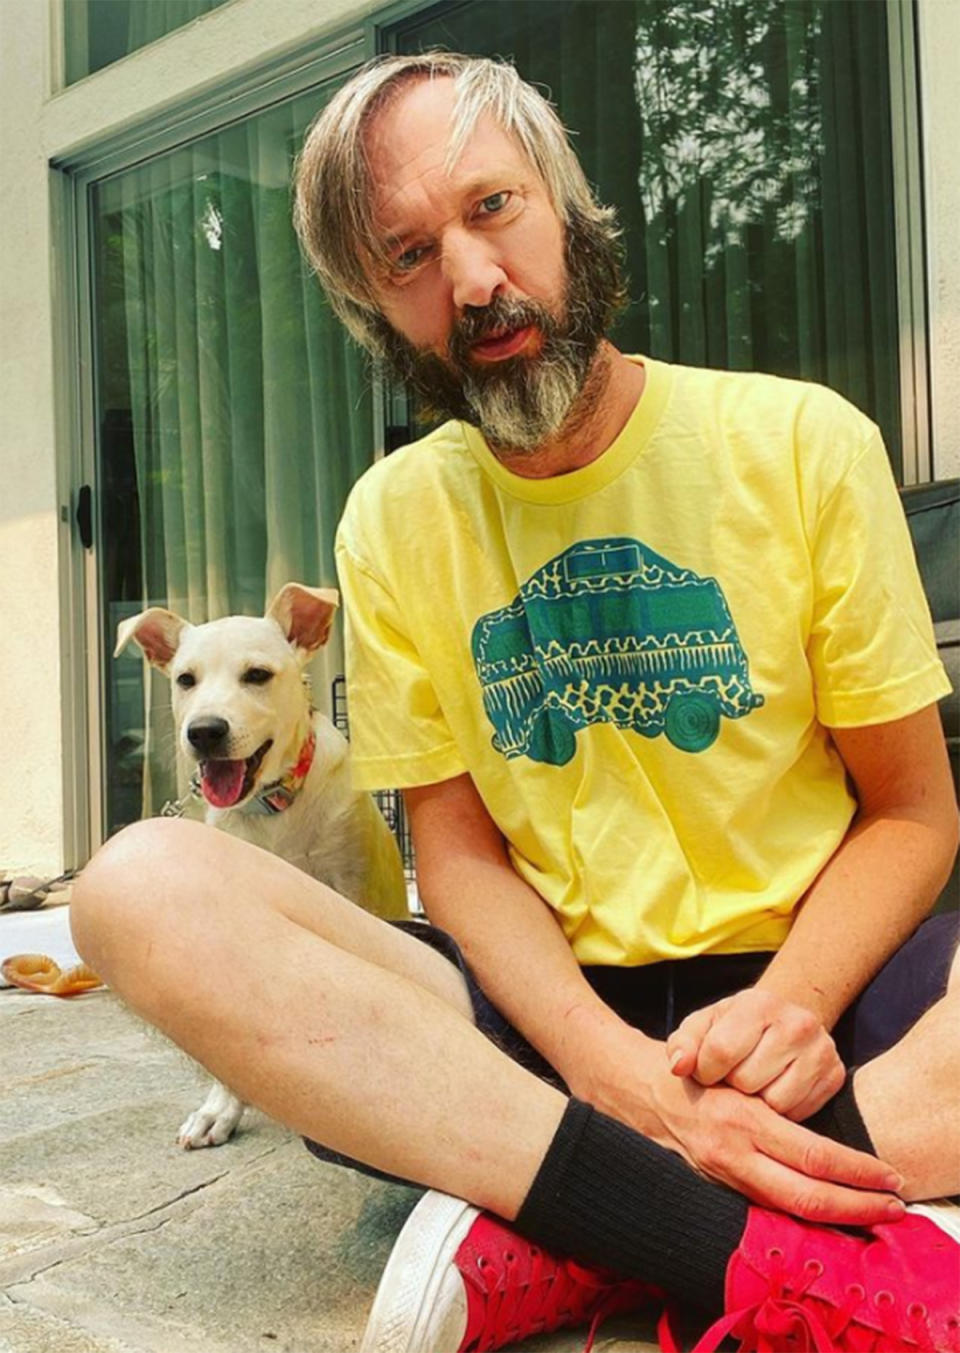 Tom Green wearing a yellow t-shirt with his dog. Photo: Instagram/tomgreen.